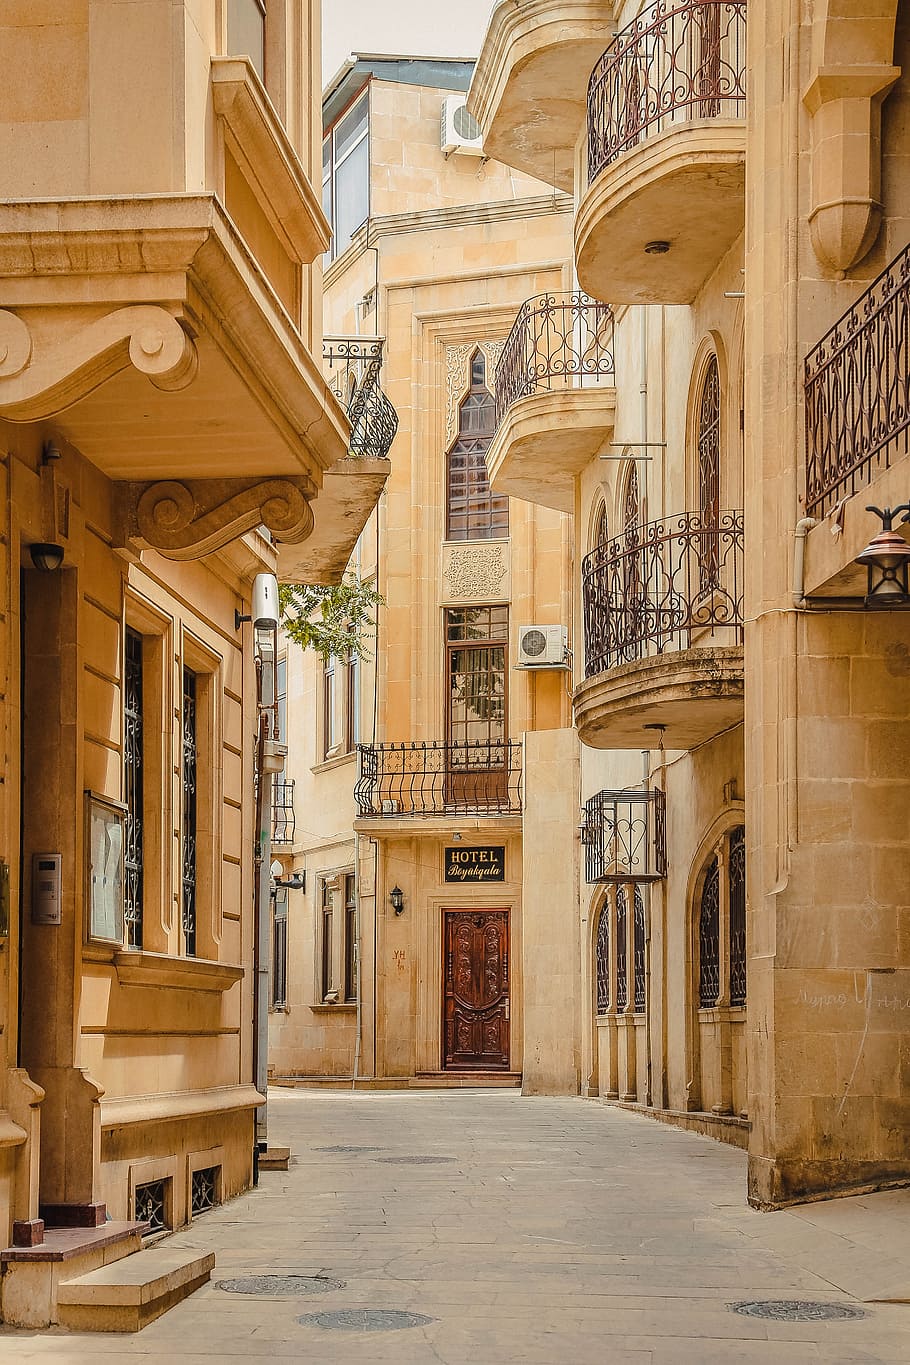 alleyway surrounded by houses, Ancient, Antique, Arabic, Architecture